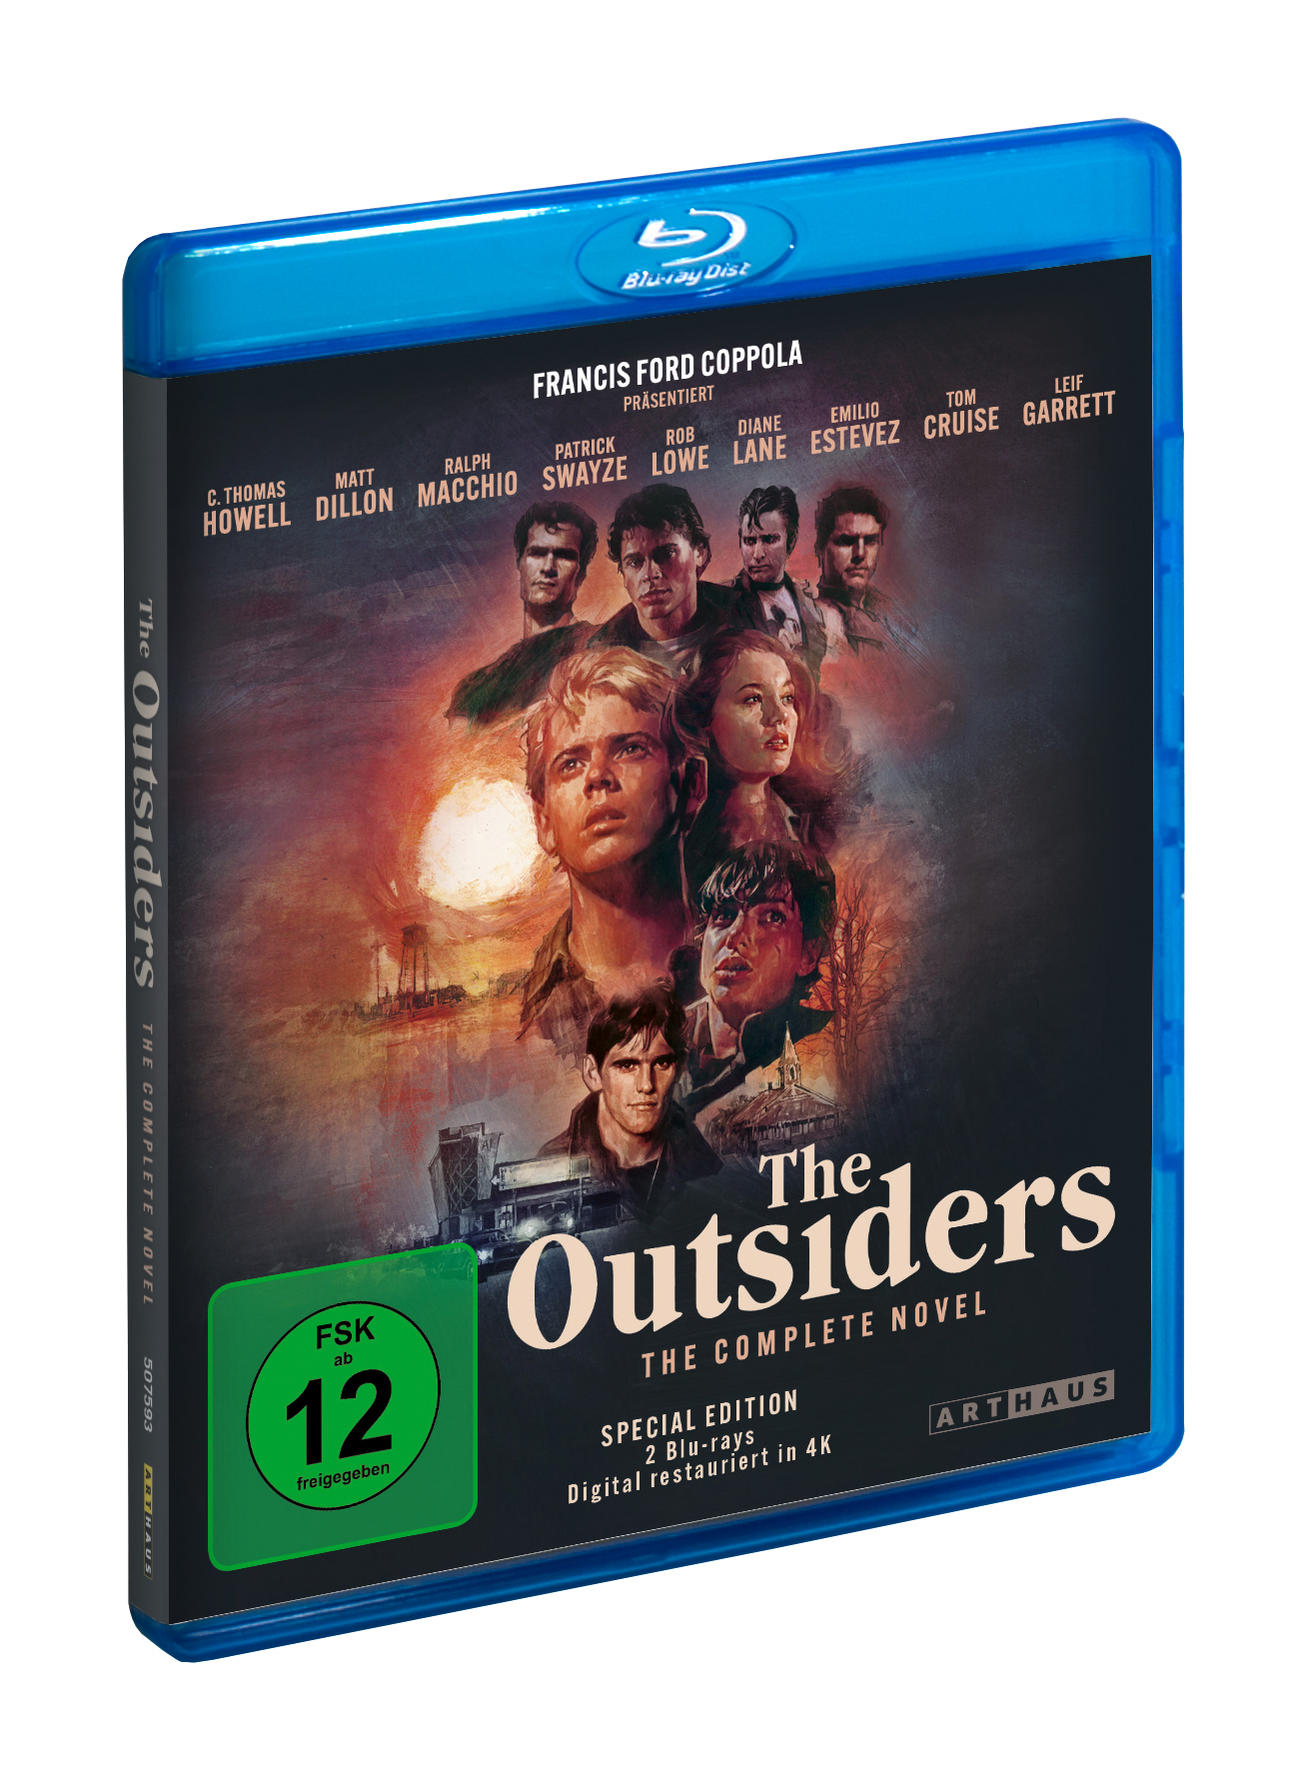 The Outsiders Blu-ray